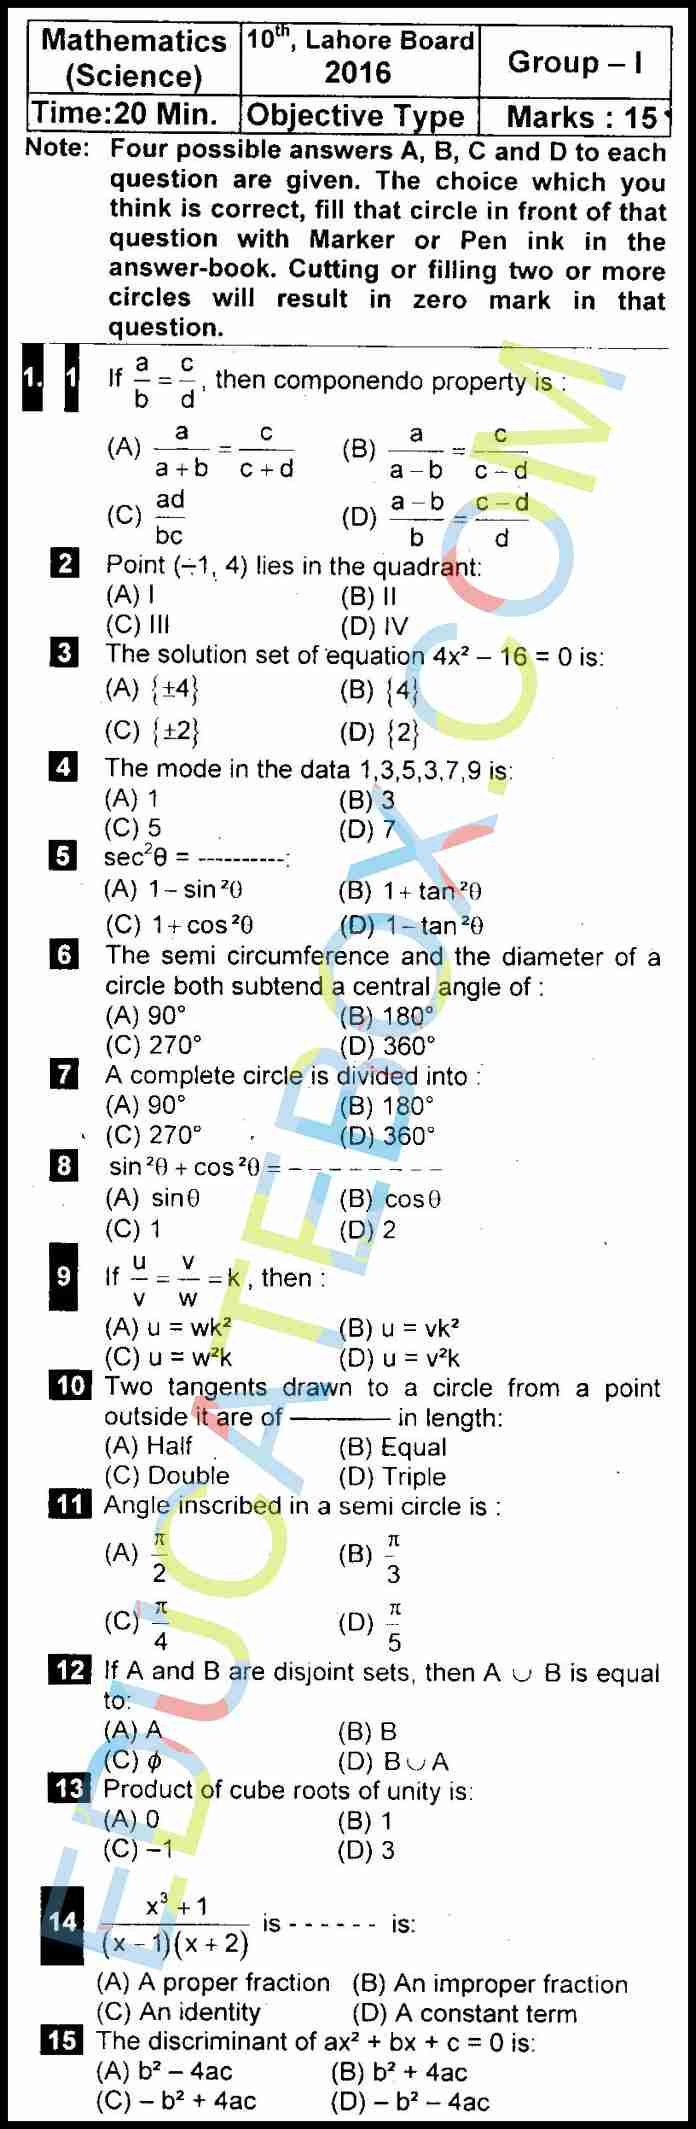 Past Paper Class 10 Maths Lahore Board 2016 Objective Type Group 1 (English Medium)